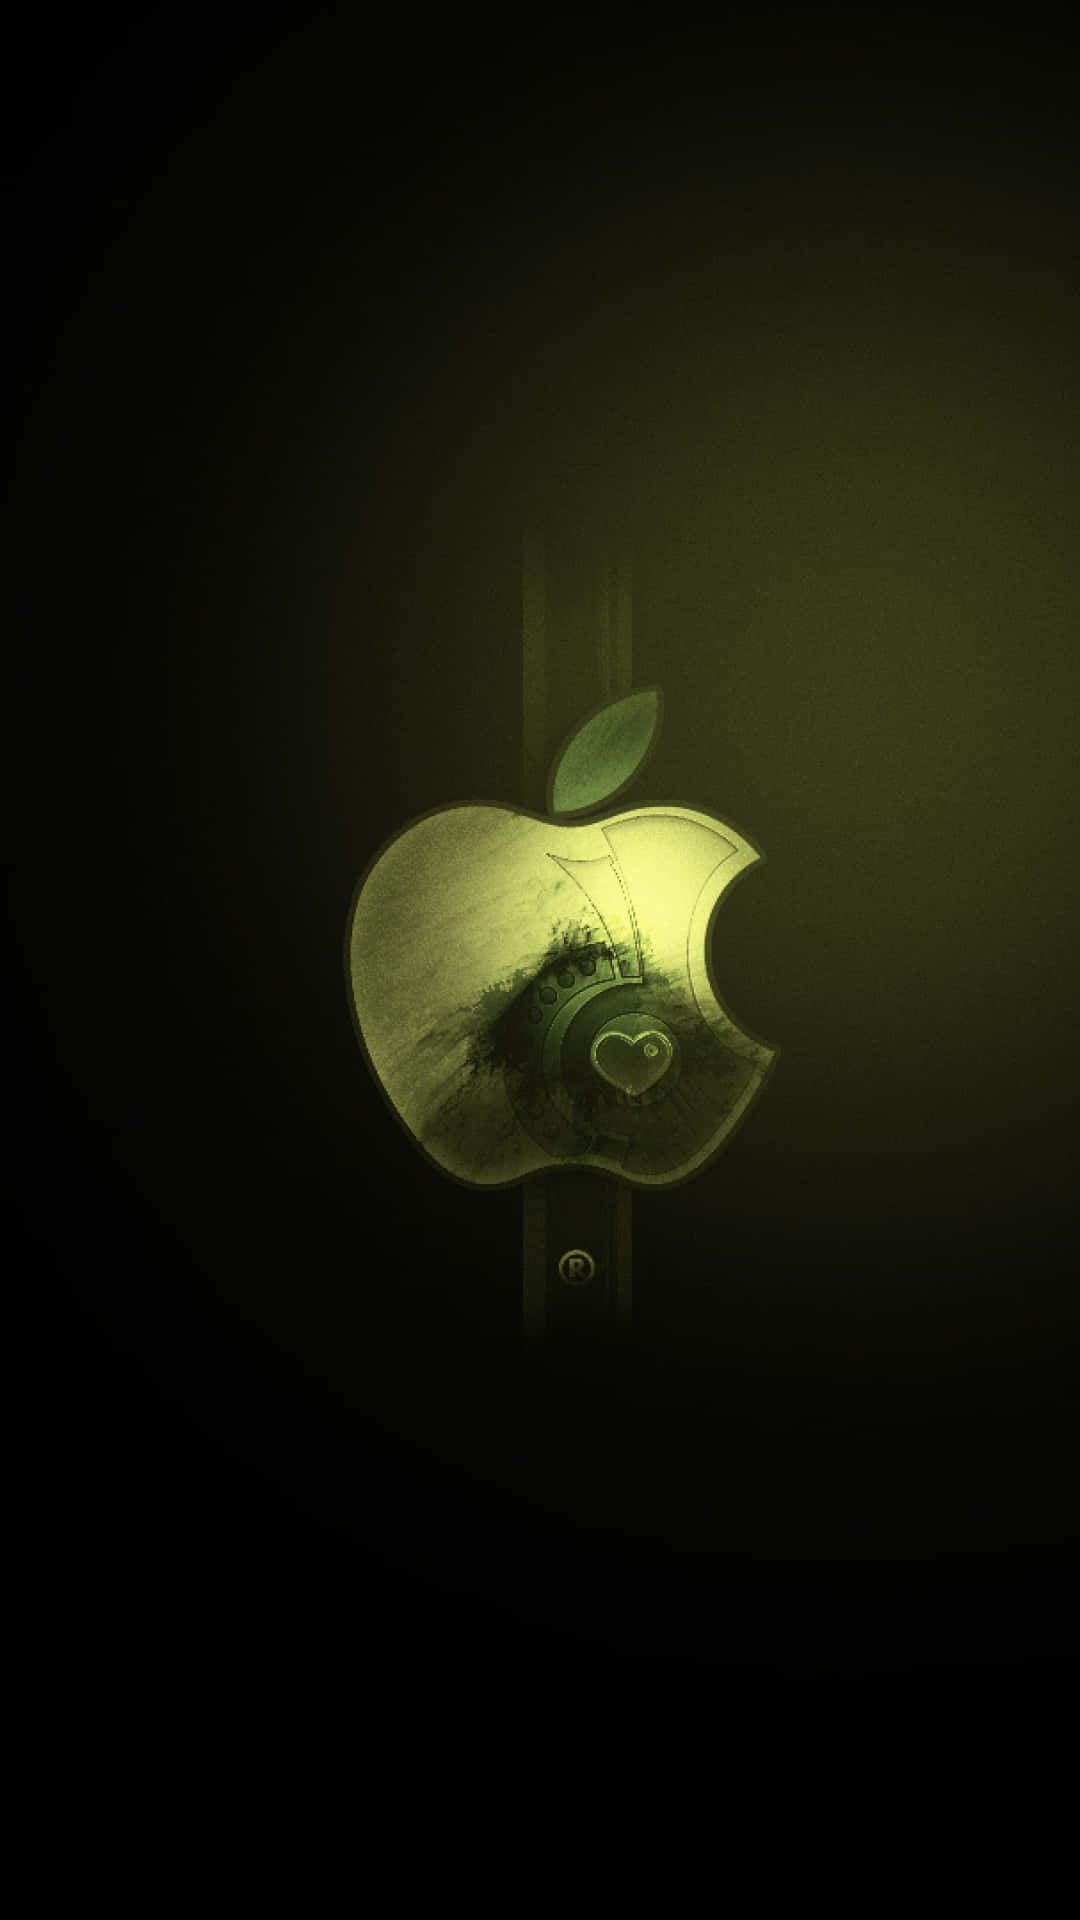 “‘Cool Apple’ for All Your Fruitful Needs" Wallpaper